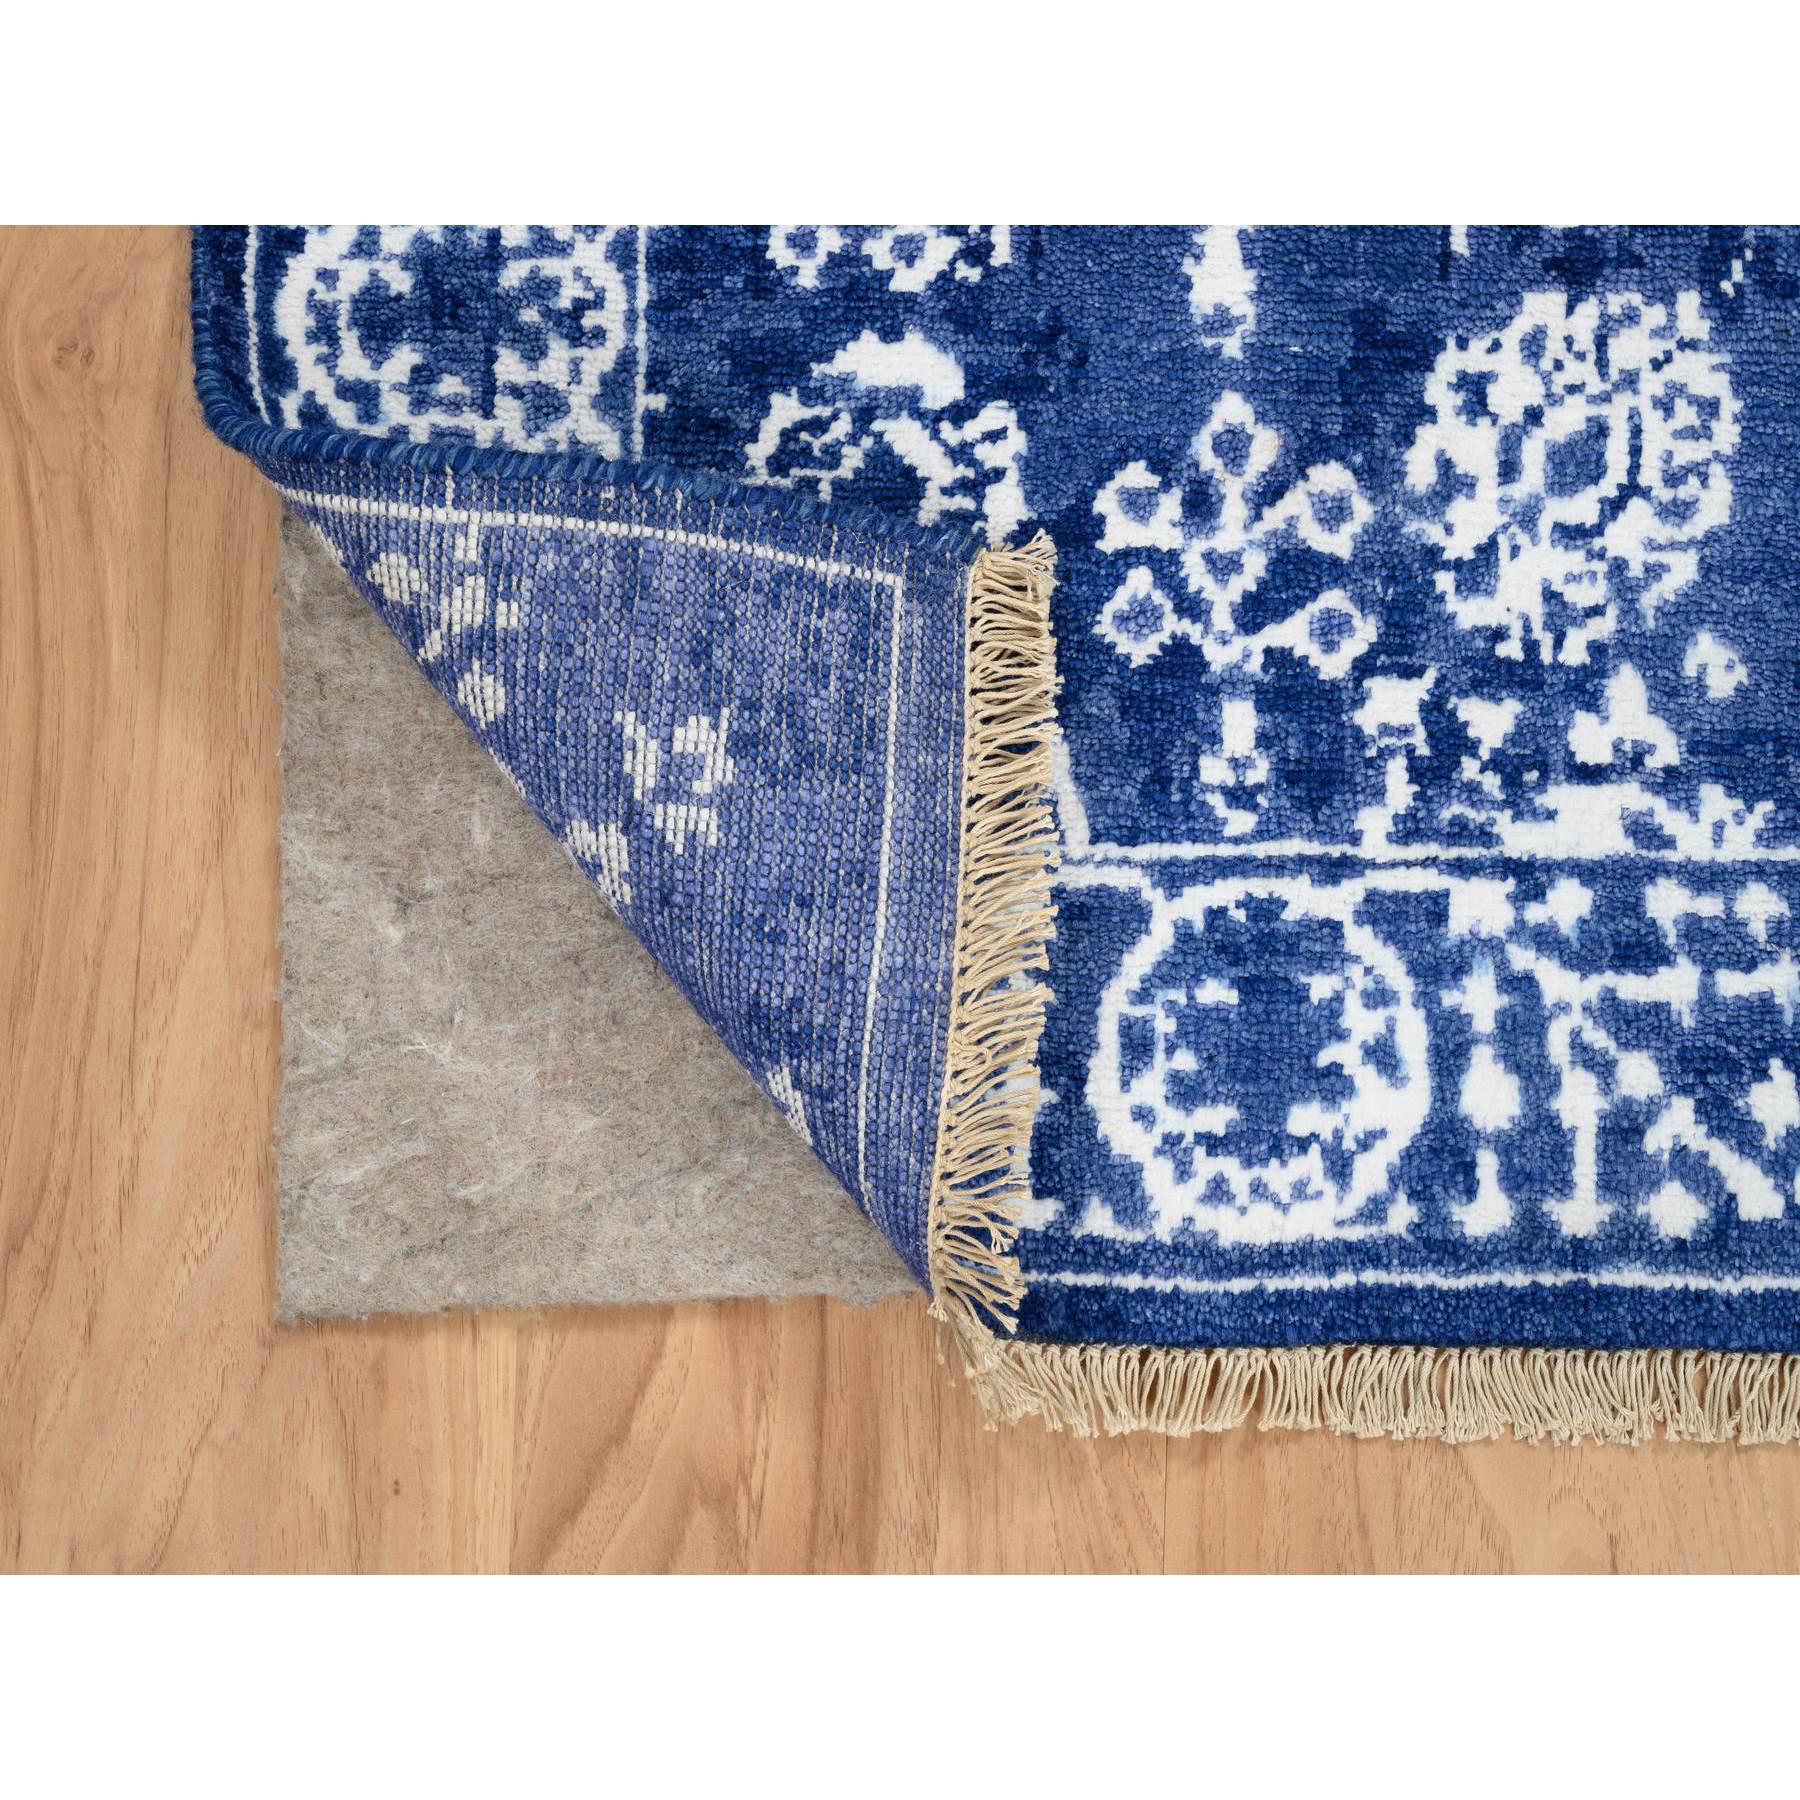 2'1"x3' Denim Blue, Tabriz with All Over Motifs Tone on Tone, Wool and Silk Hand Woven, Mat Oriental Rug 